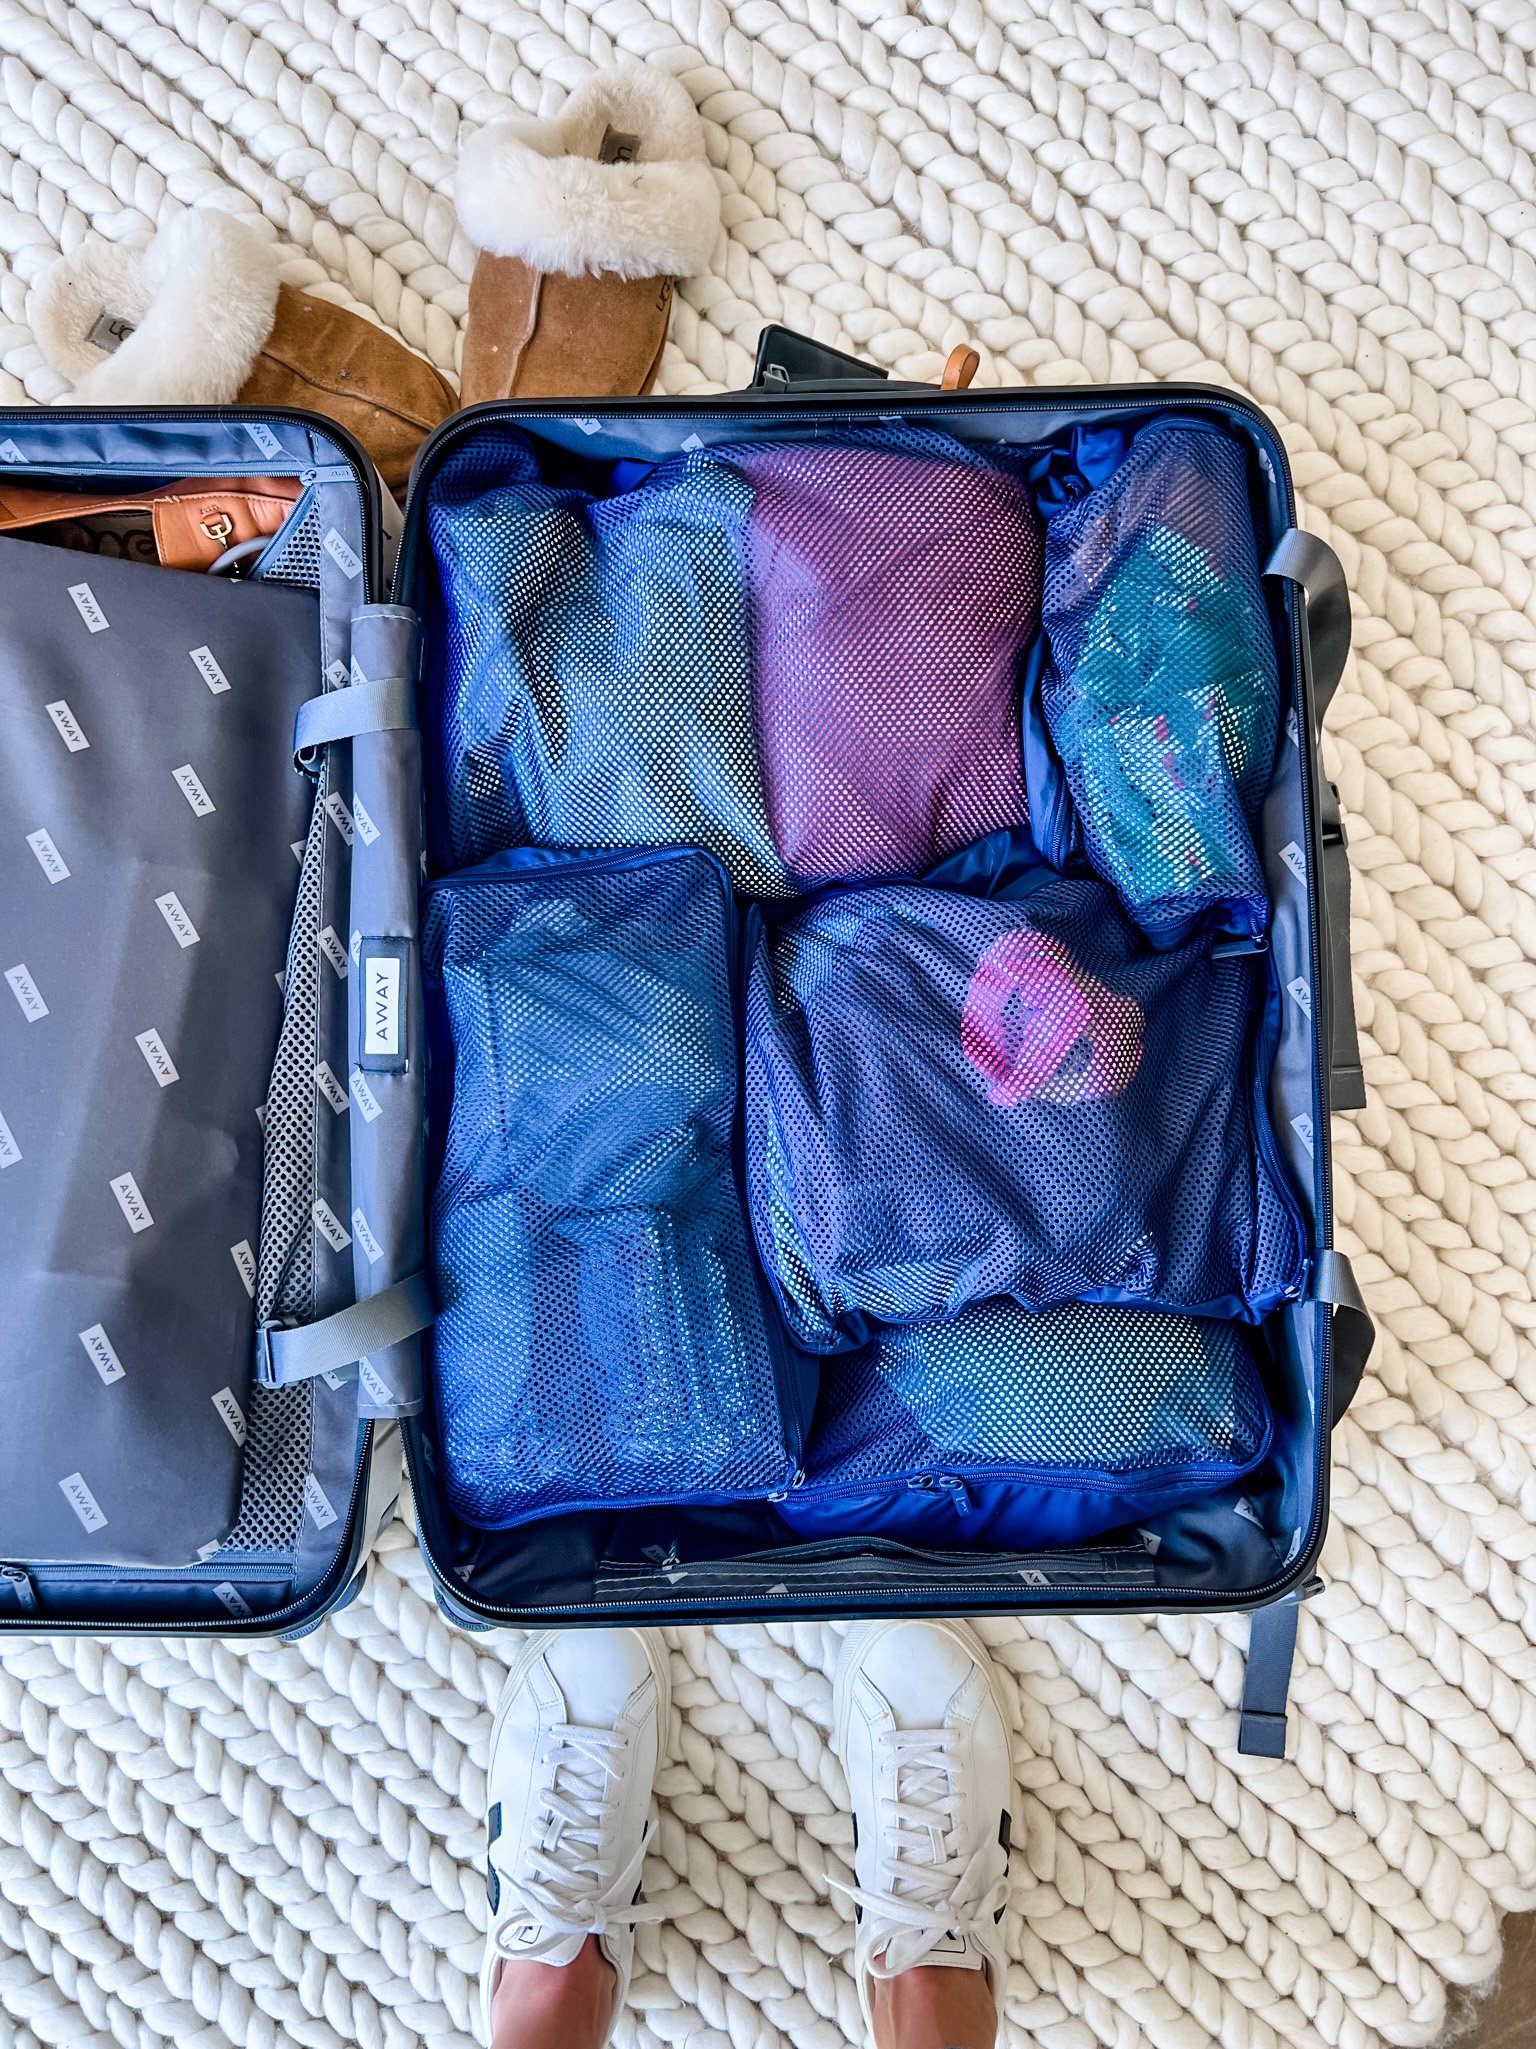 How to use packing cubes